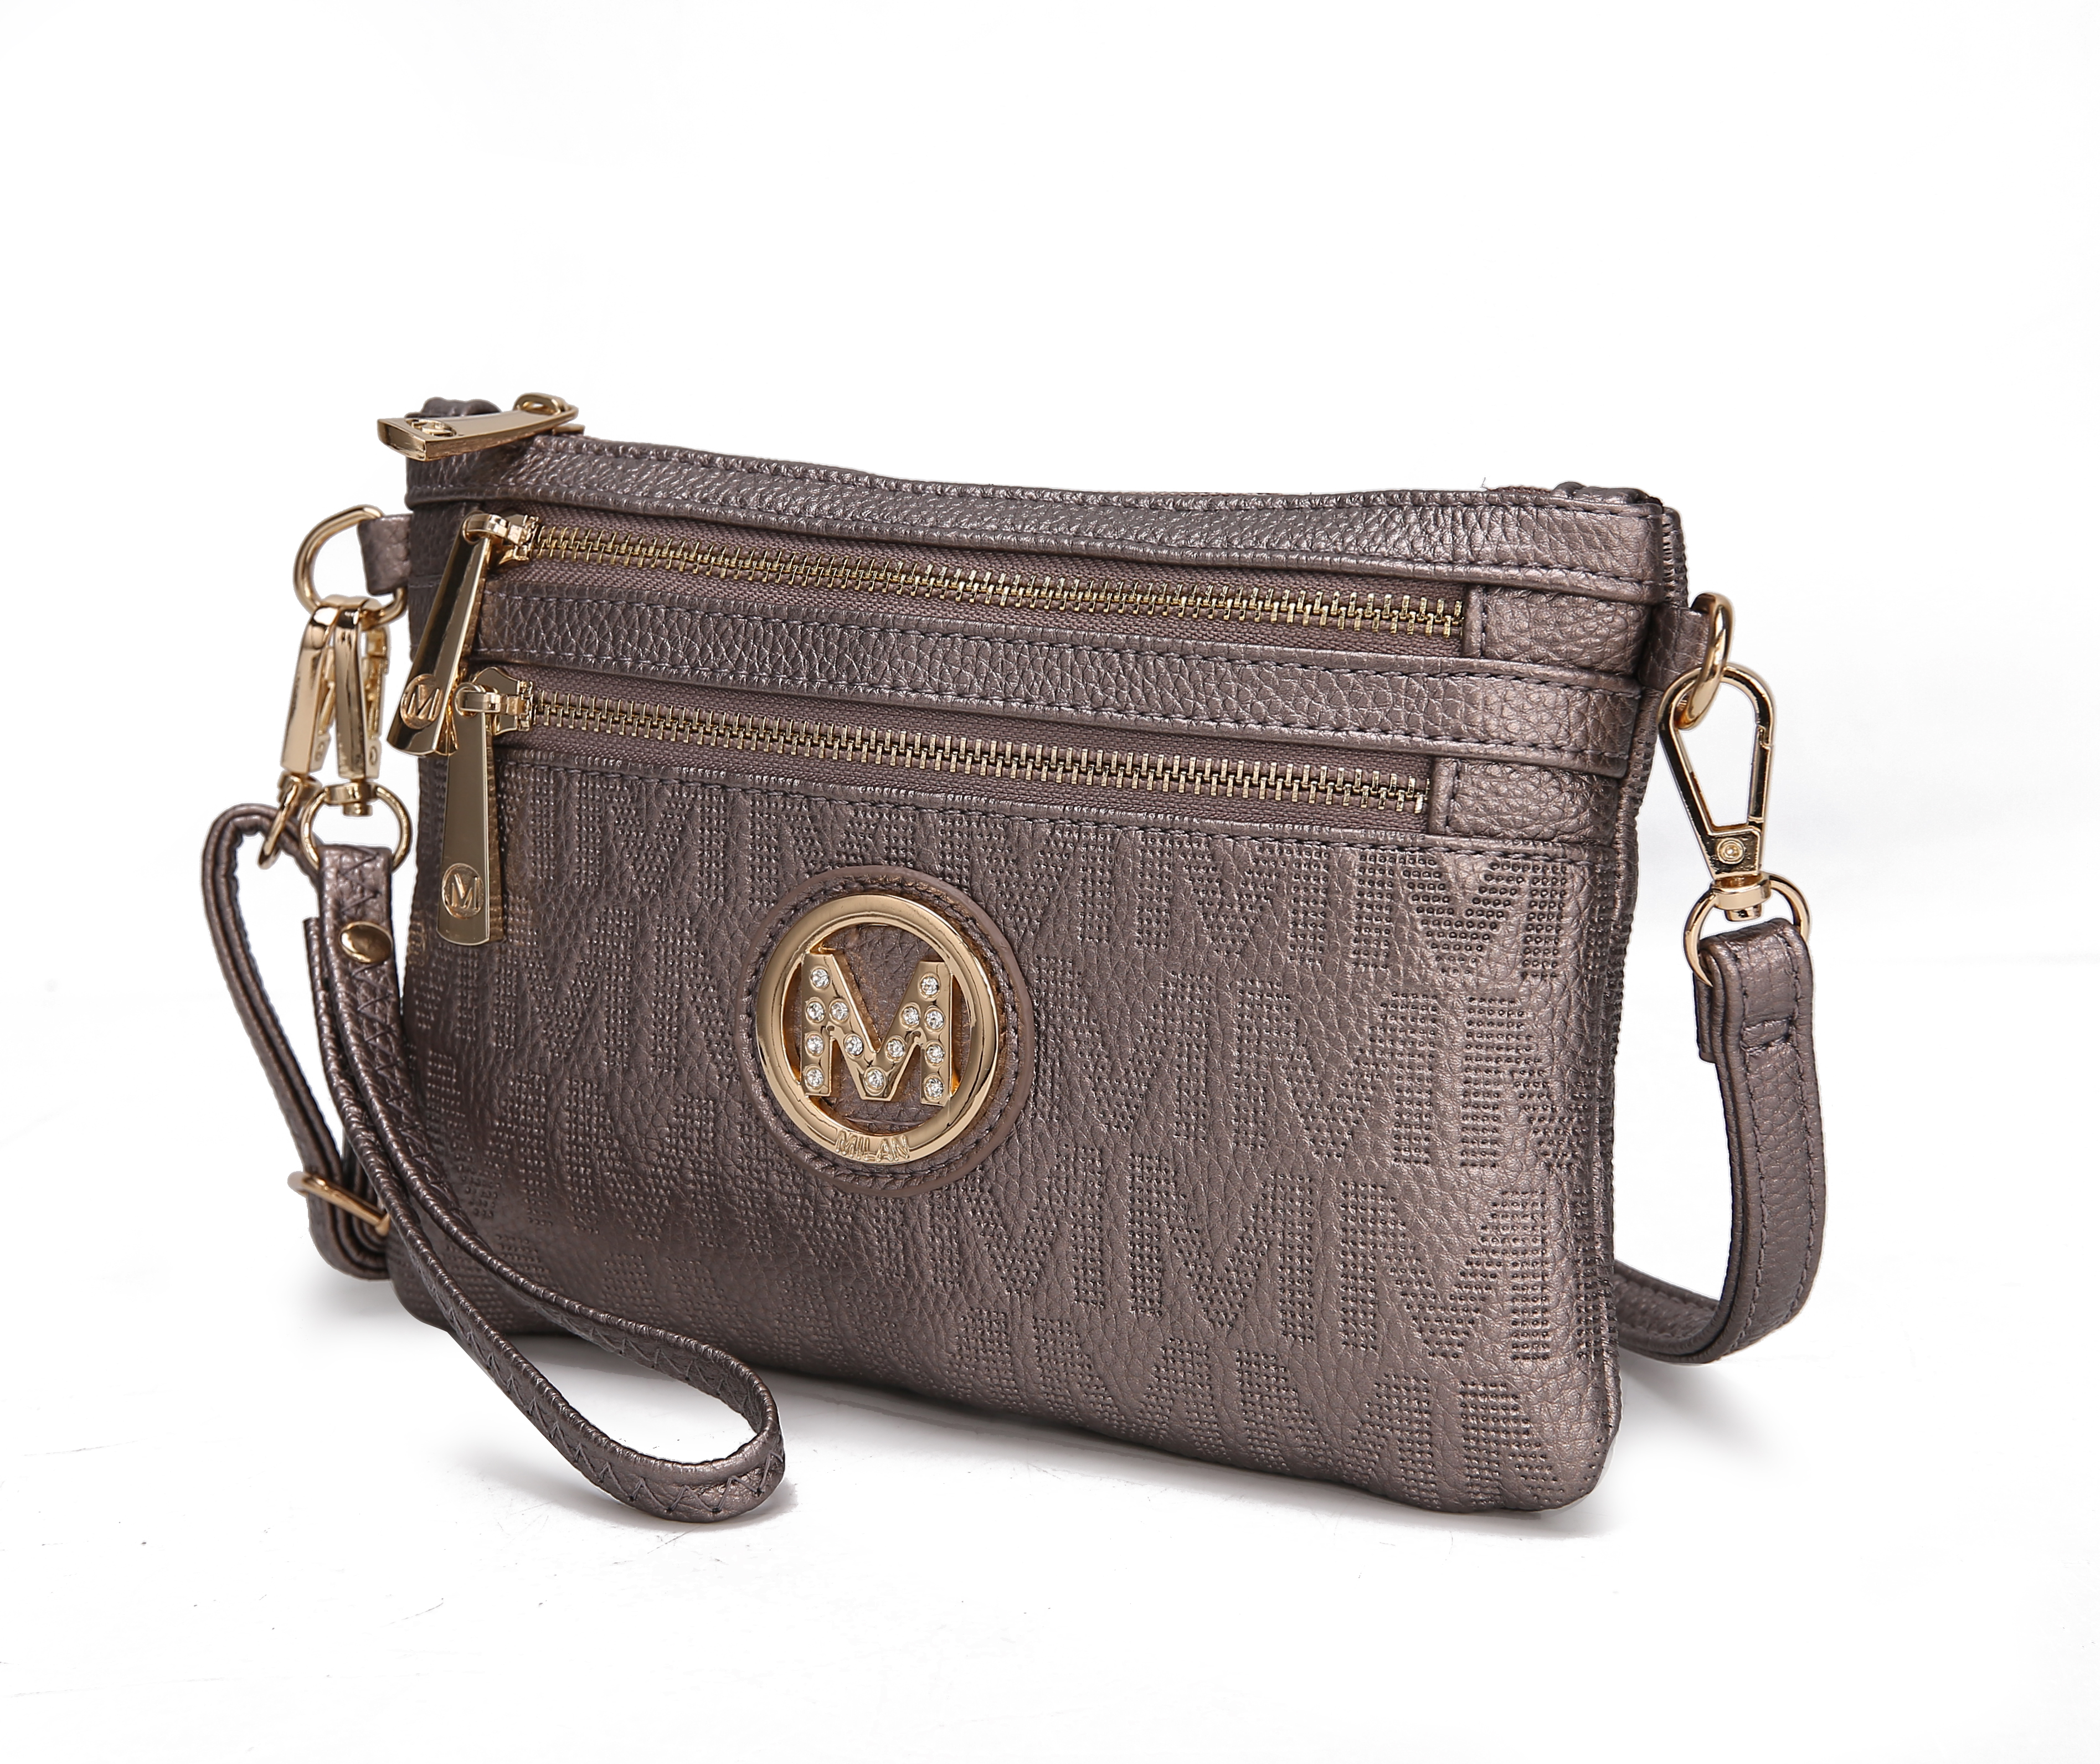 Roonie Milan M Signature Crossbody Wristlet - Pewter -  MKF Collection by Mia K., MK312433